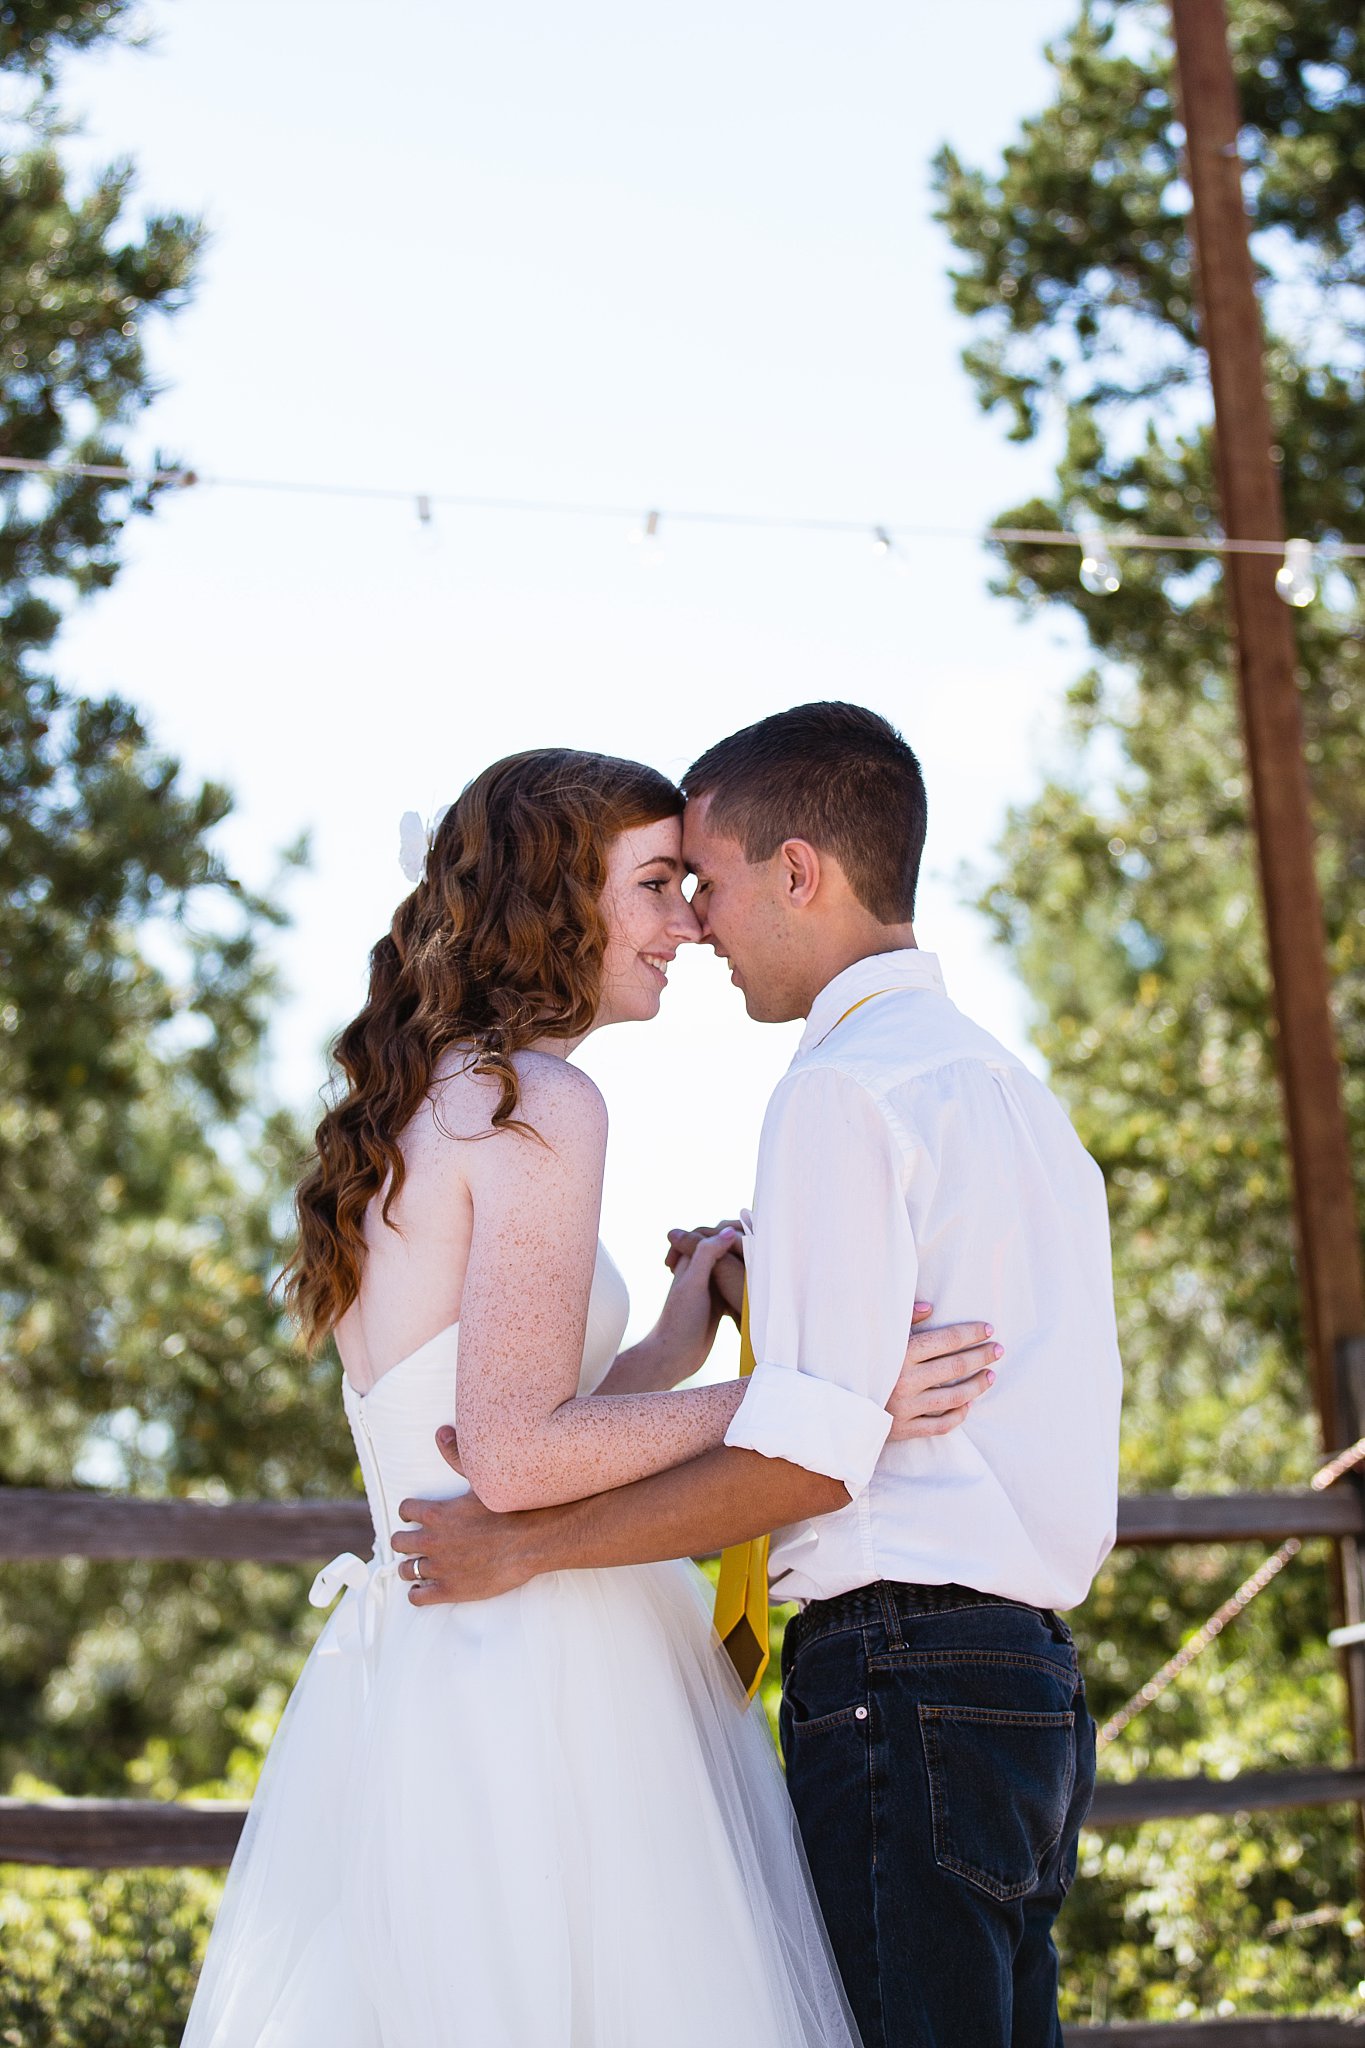 Bride and groom sharing first dance at their Sky Ranch Lodge wedding reception by Arizona wedding photographer PMA Photography.